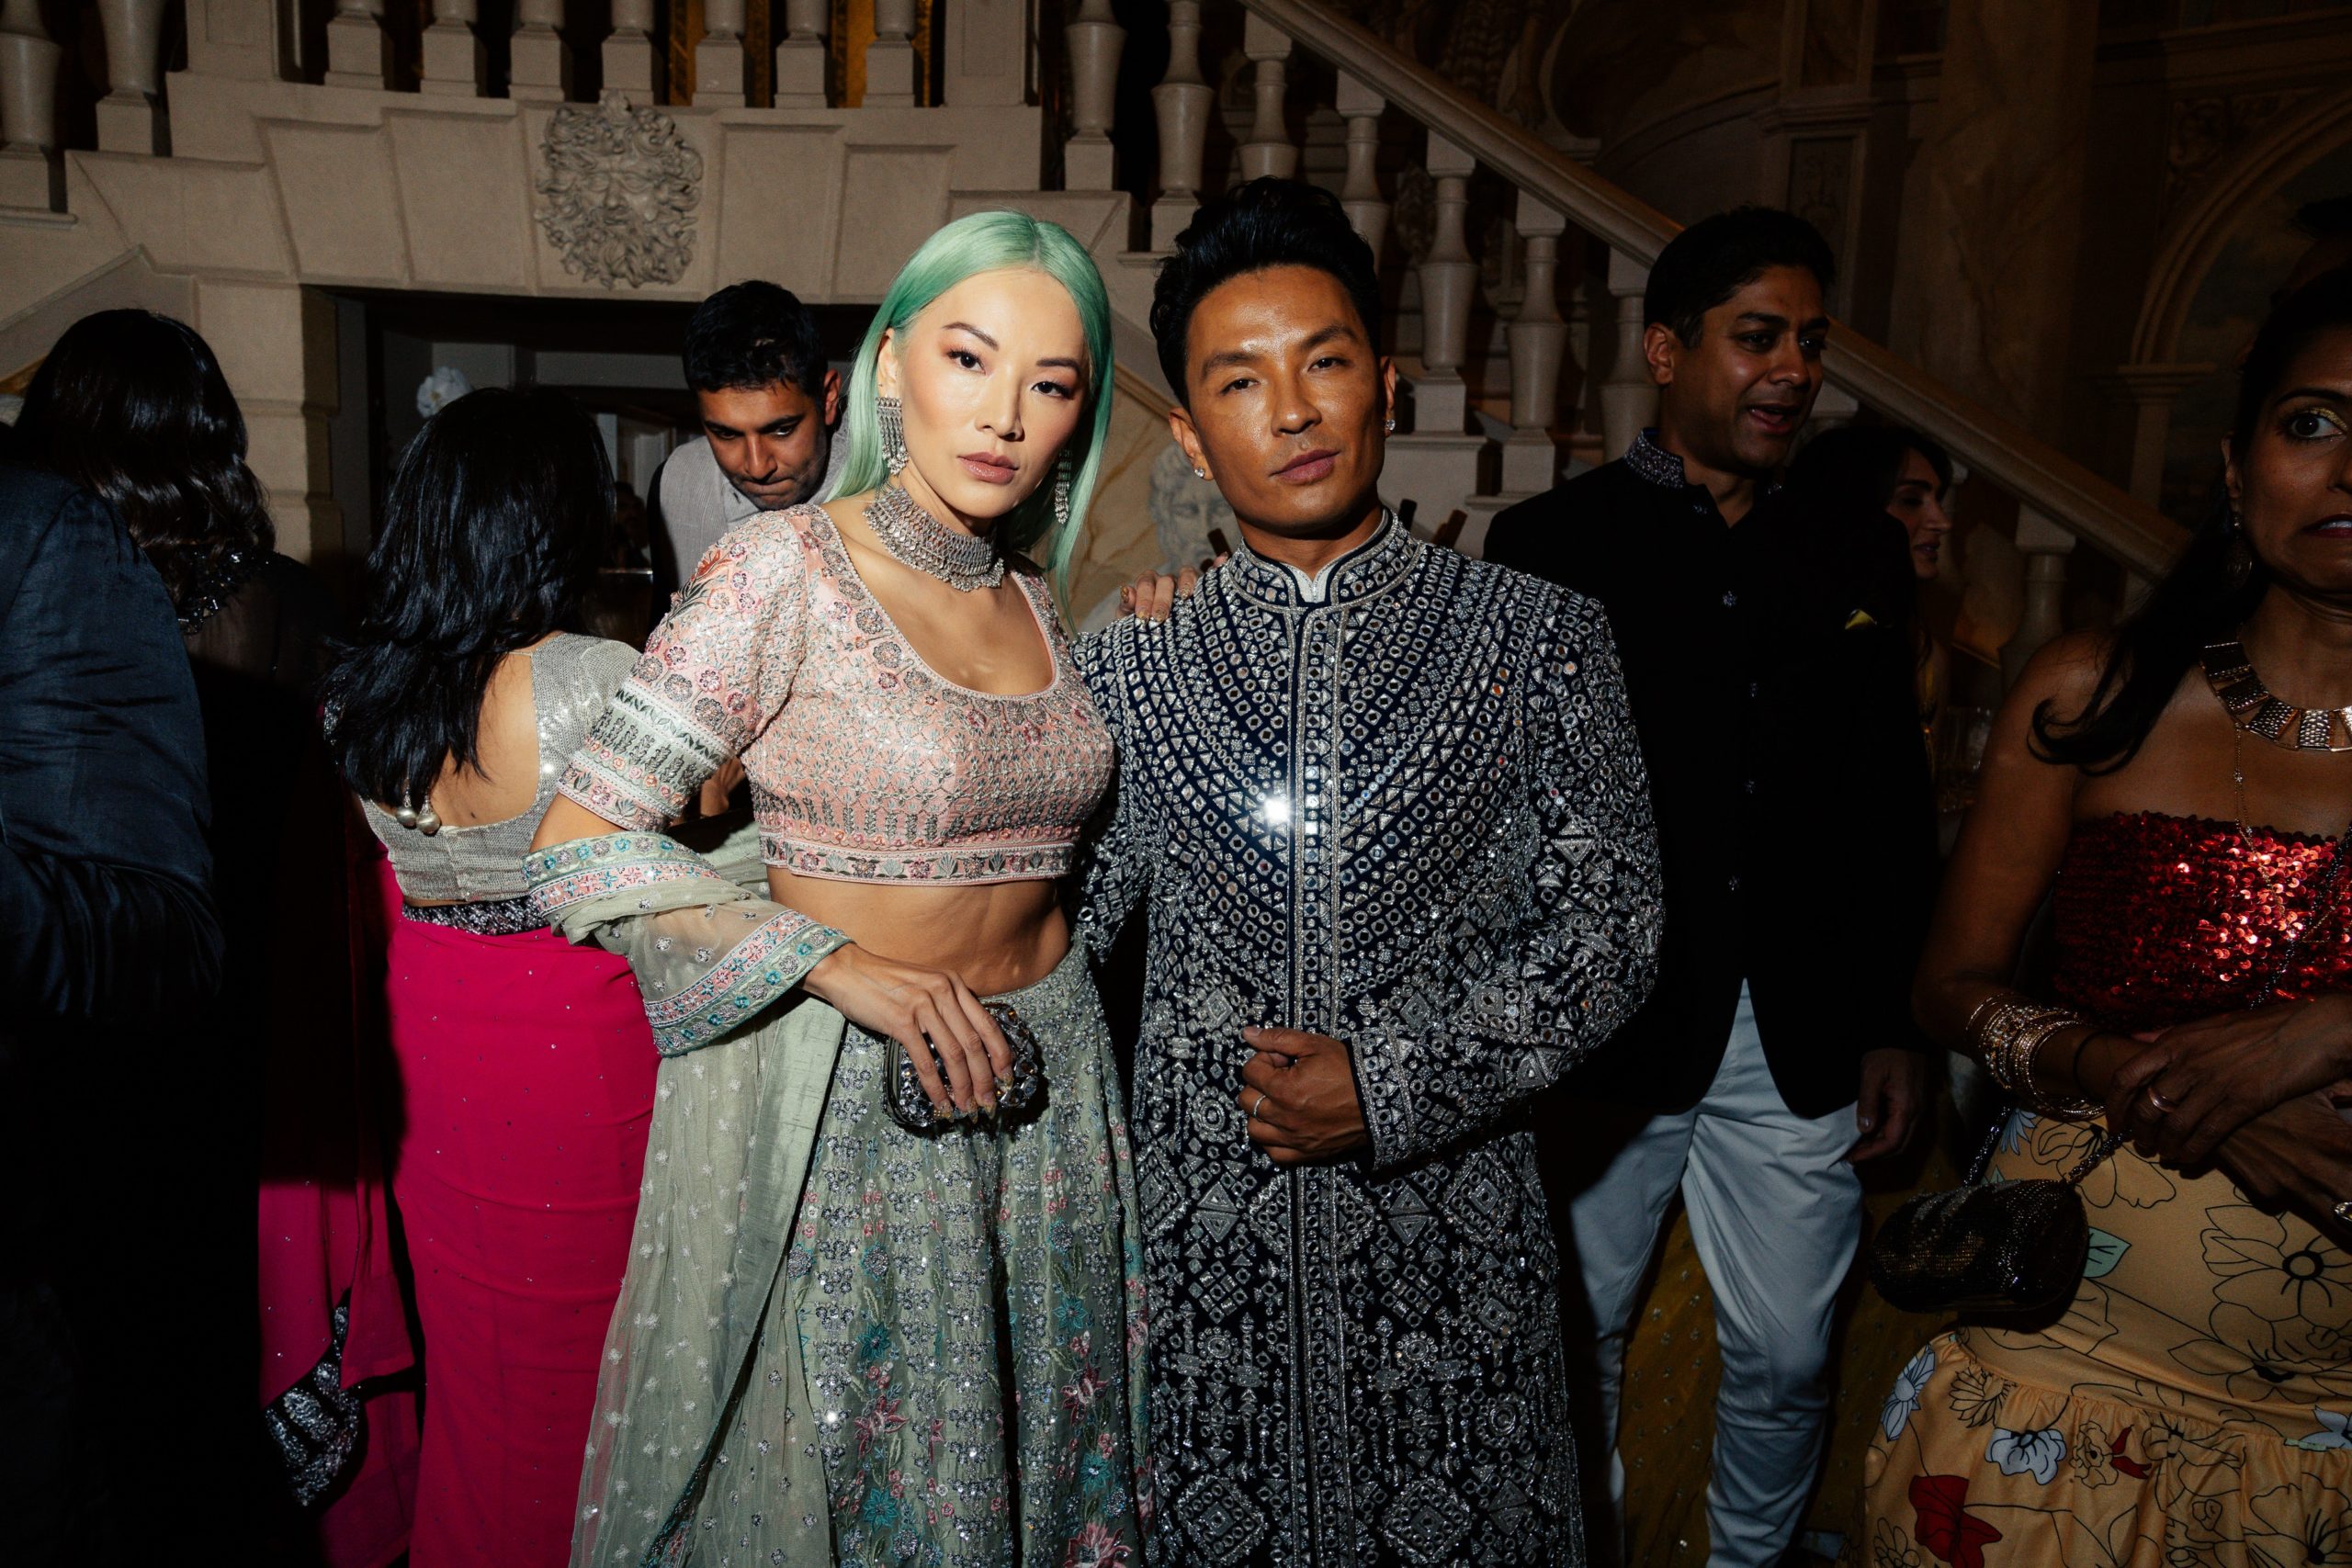 Everyone Came Out to this Glamorous Diwali Party, Hosted by Vanity Fair’s Radhika Jones, Prabal Gurung, and More